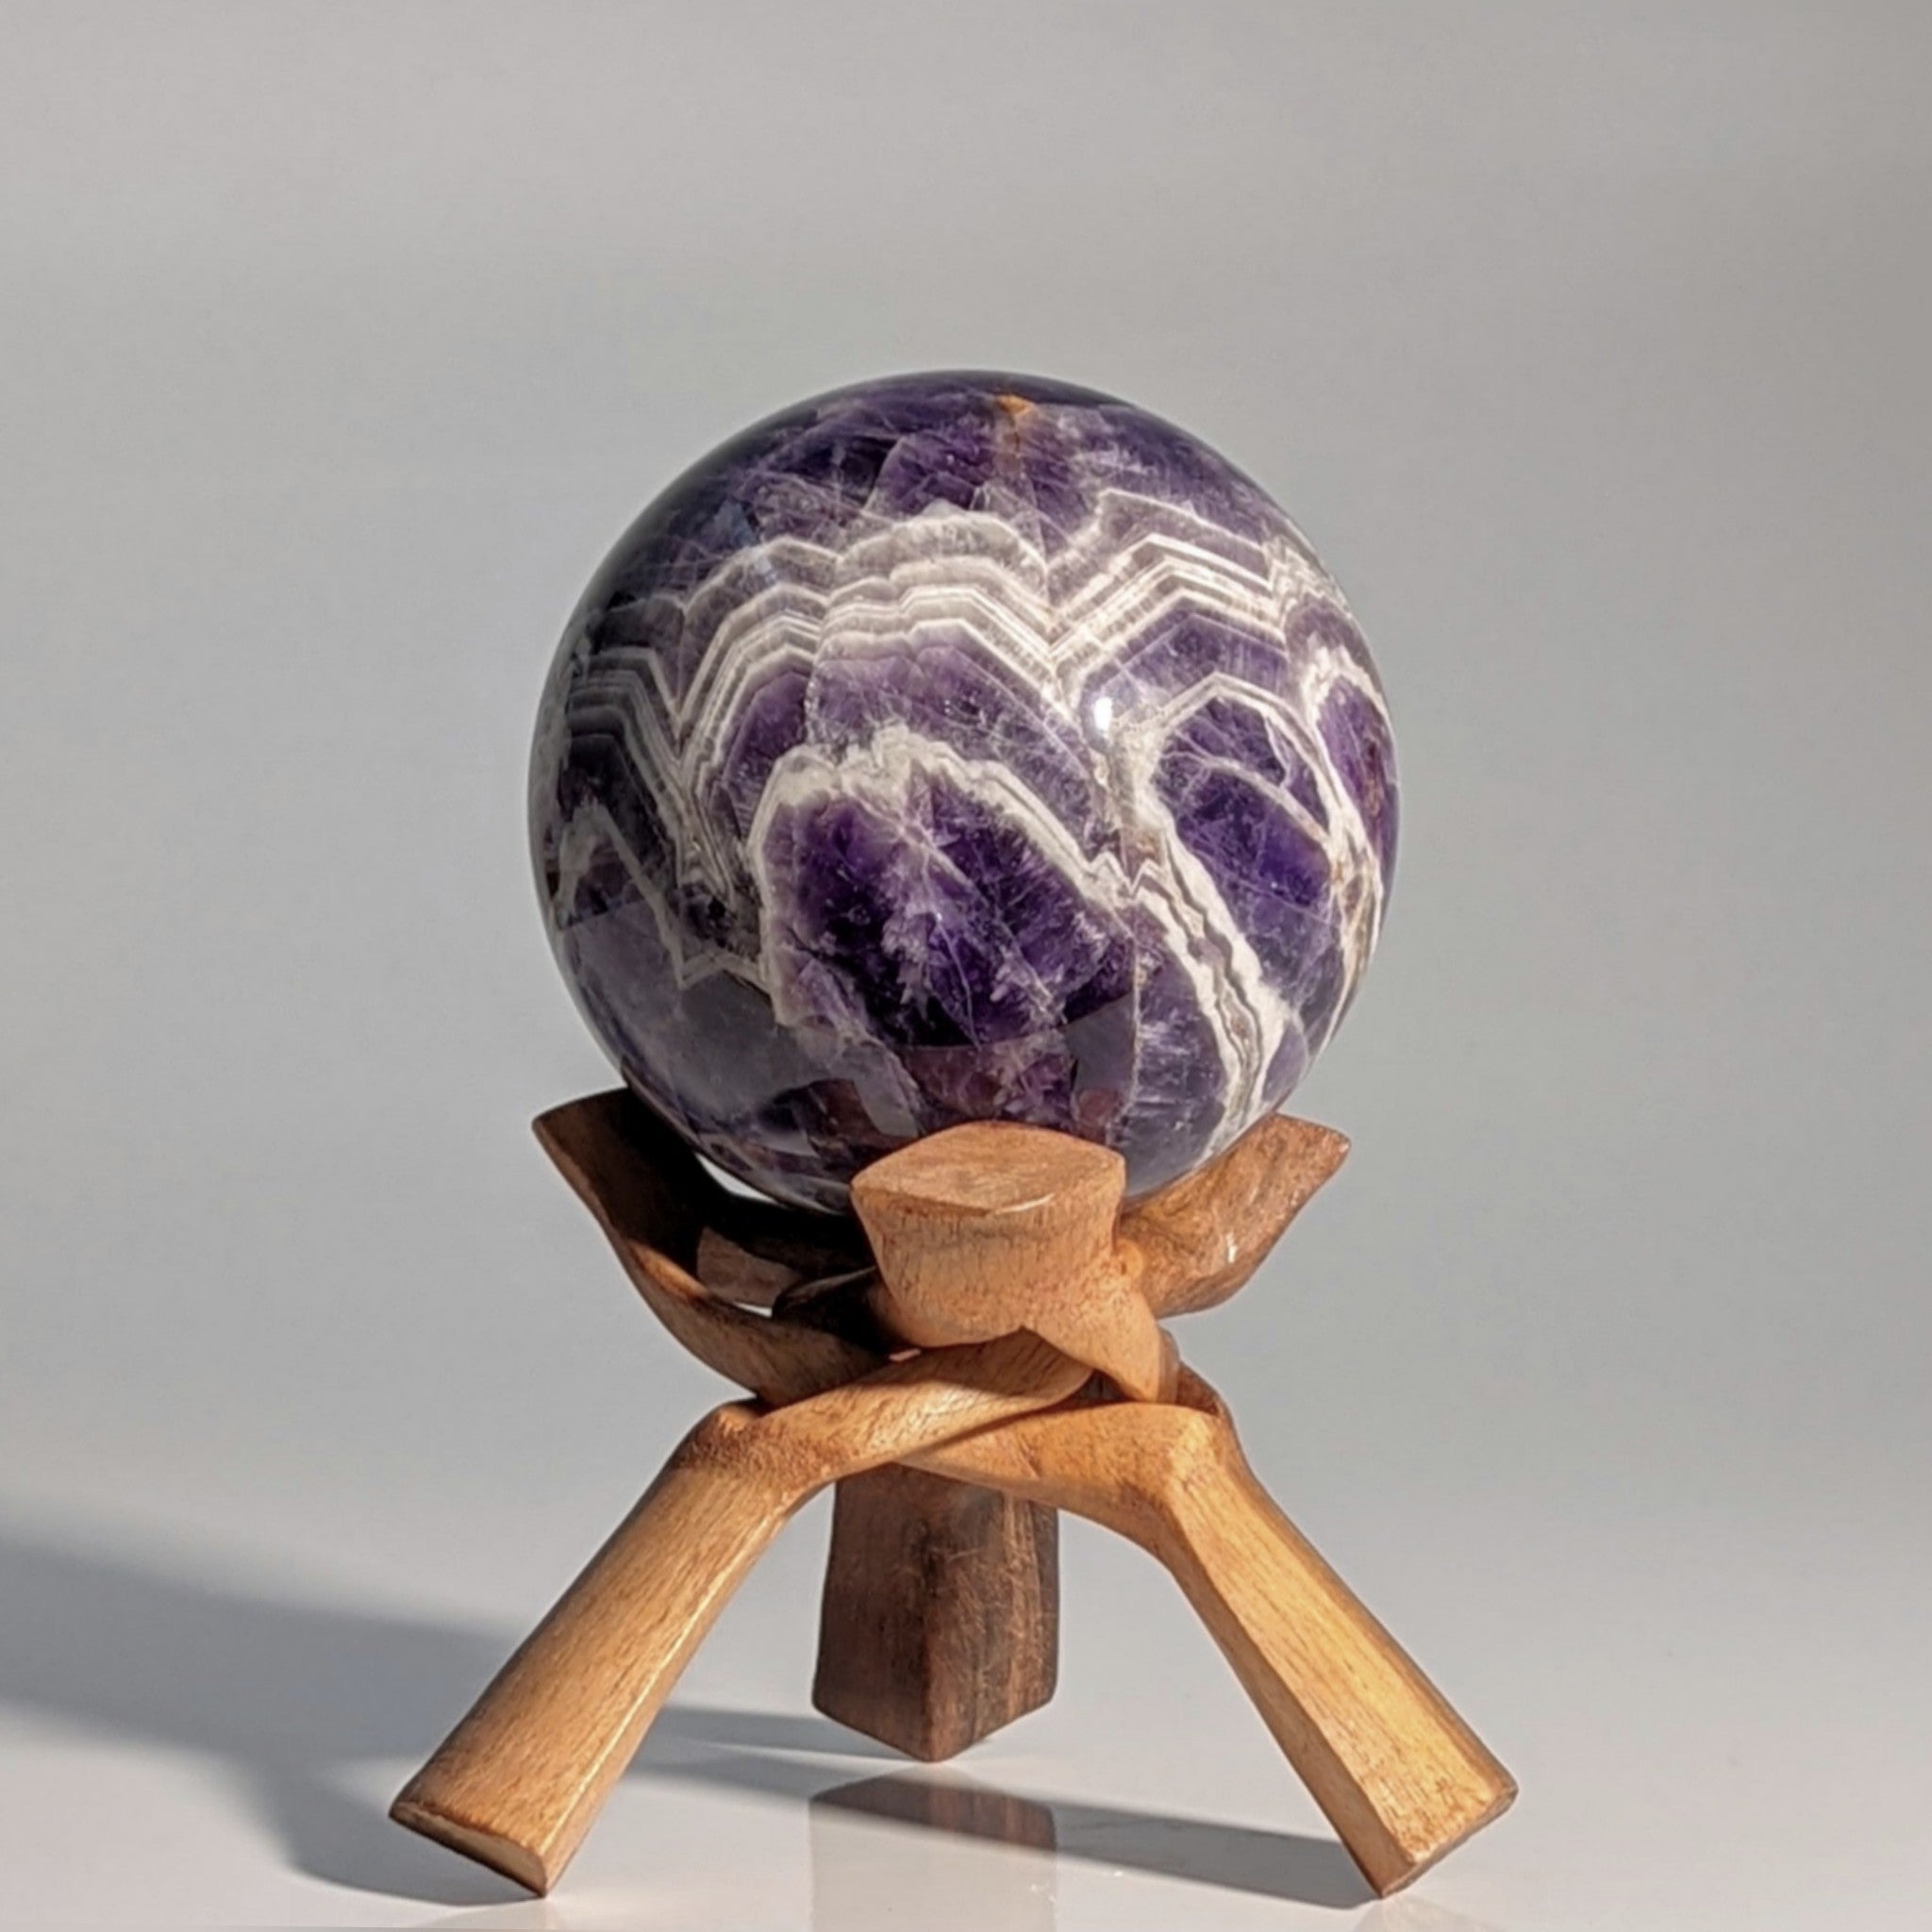 Deep Purple Chevron Amethyst Polished Sphere on Wooden Stand